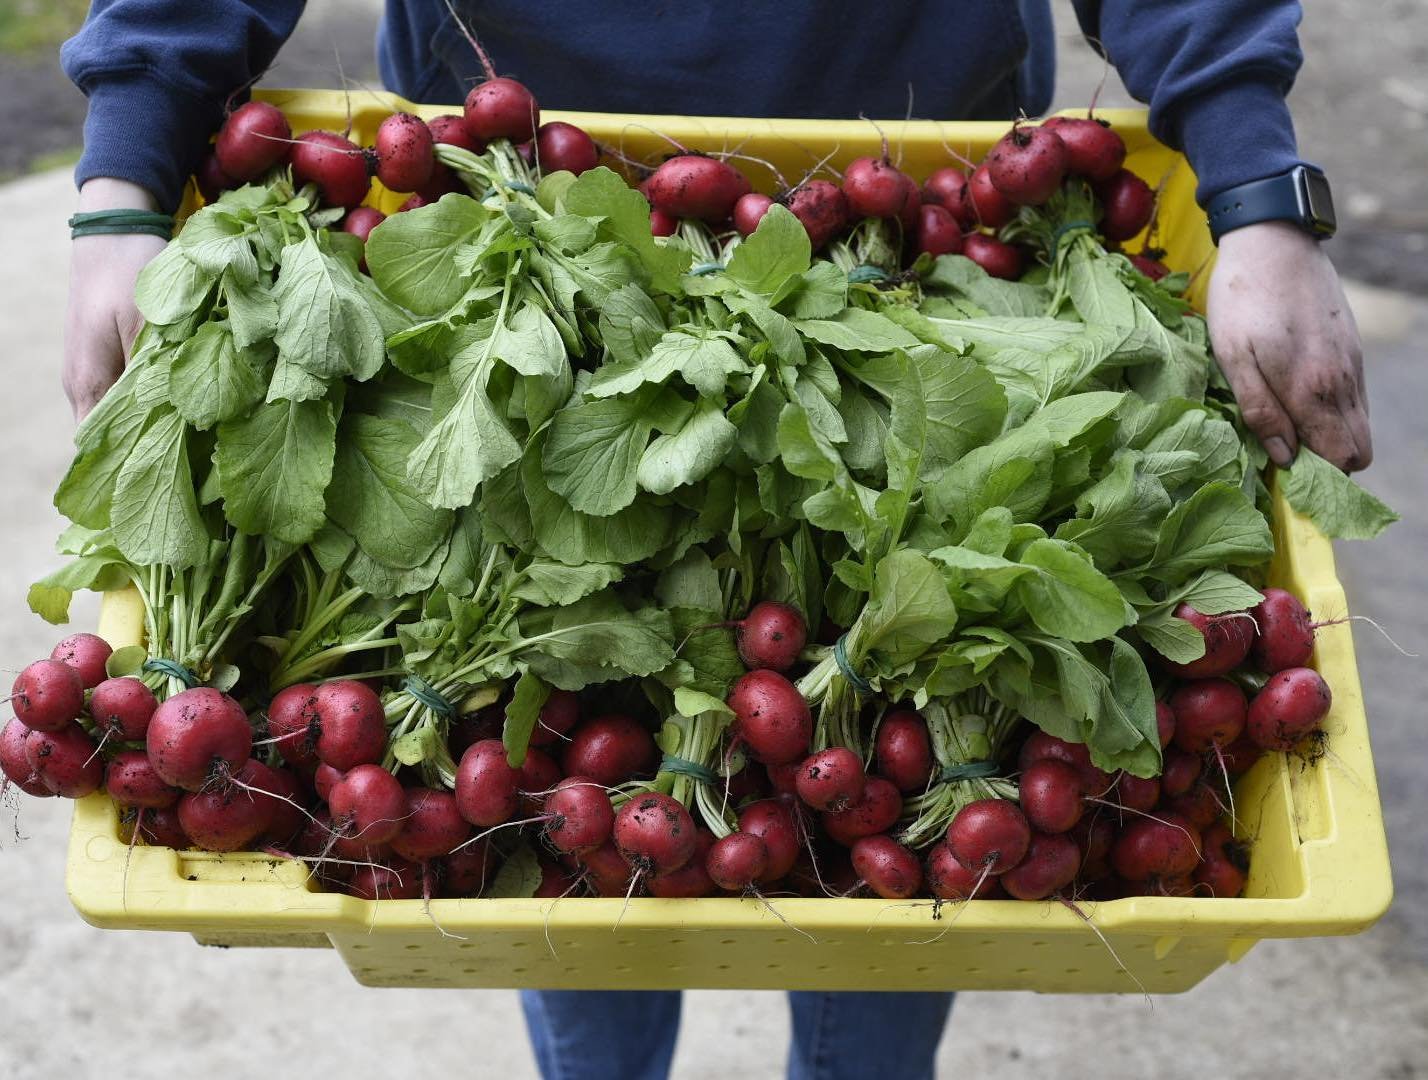 Spring radishes, for @lushvalleyfood 

If you haven&rsquo;t already heard of Lush Valley please check them out. Lush Valley is a non-profit organization dedicated to promoting food security, enhancing local food systems, and supporting sustainable ag